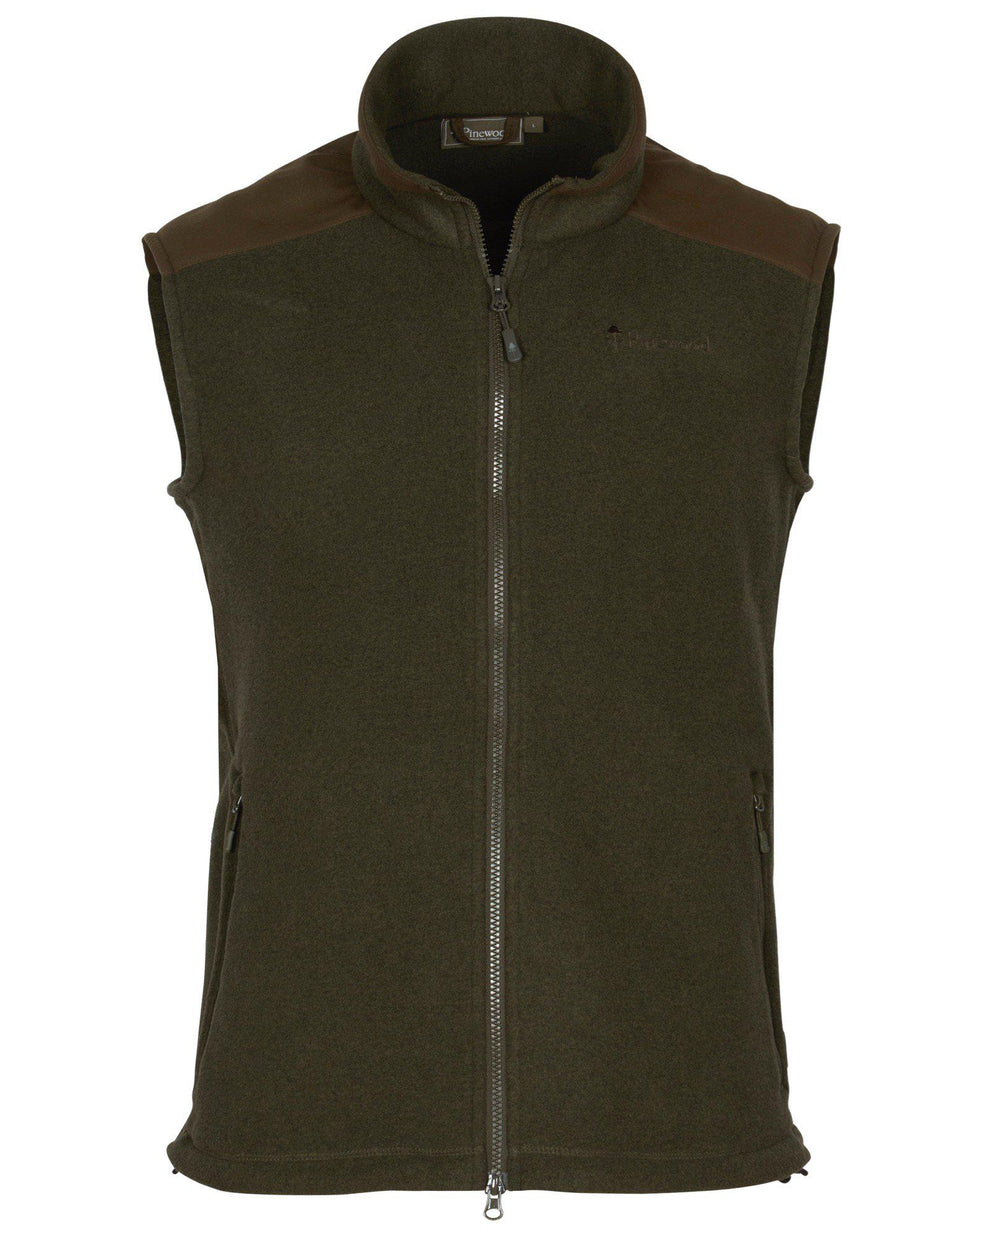 5715-114-01_Pinewood-Smaland-Forest-Fleece-Vest-Mens_Hunting-Green